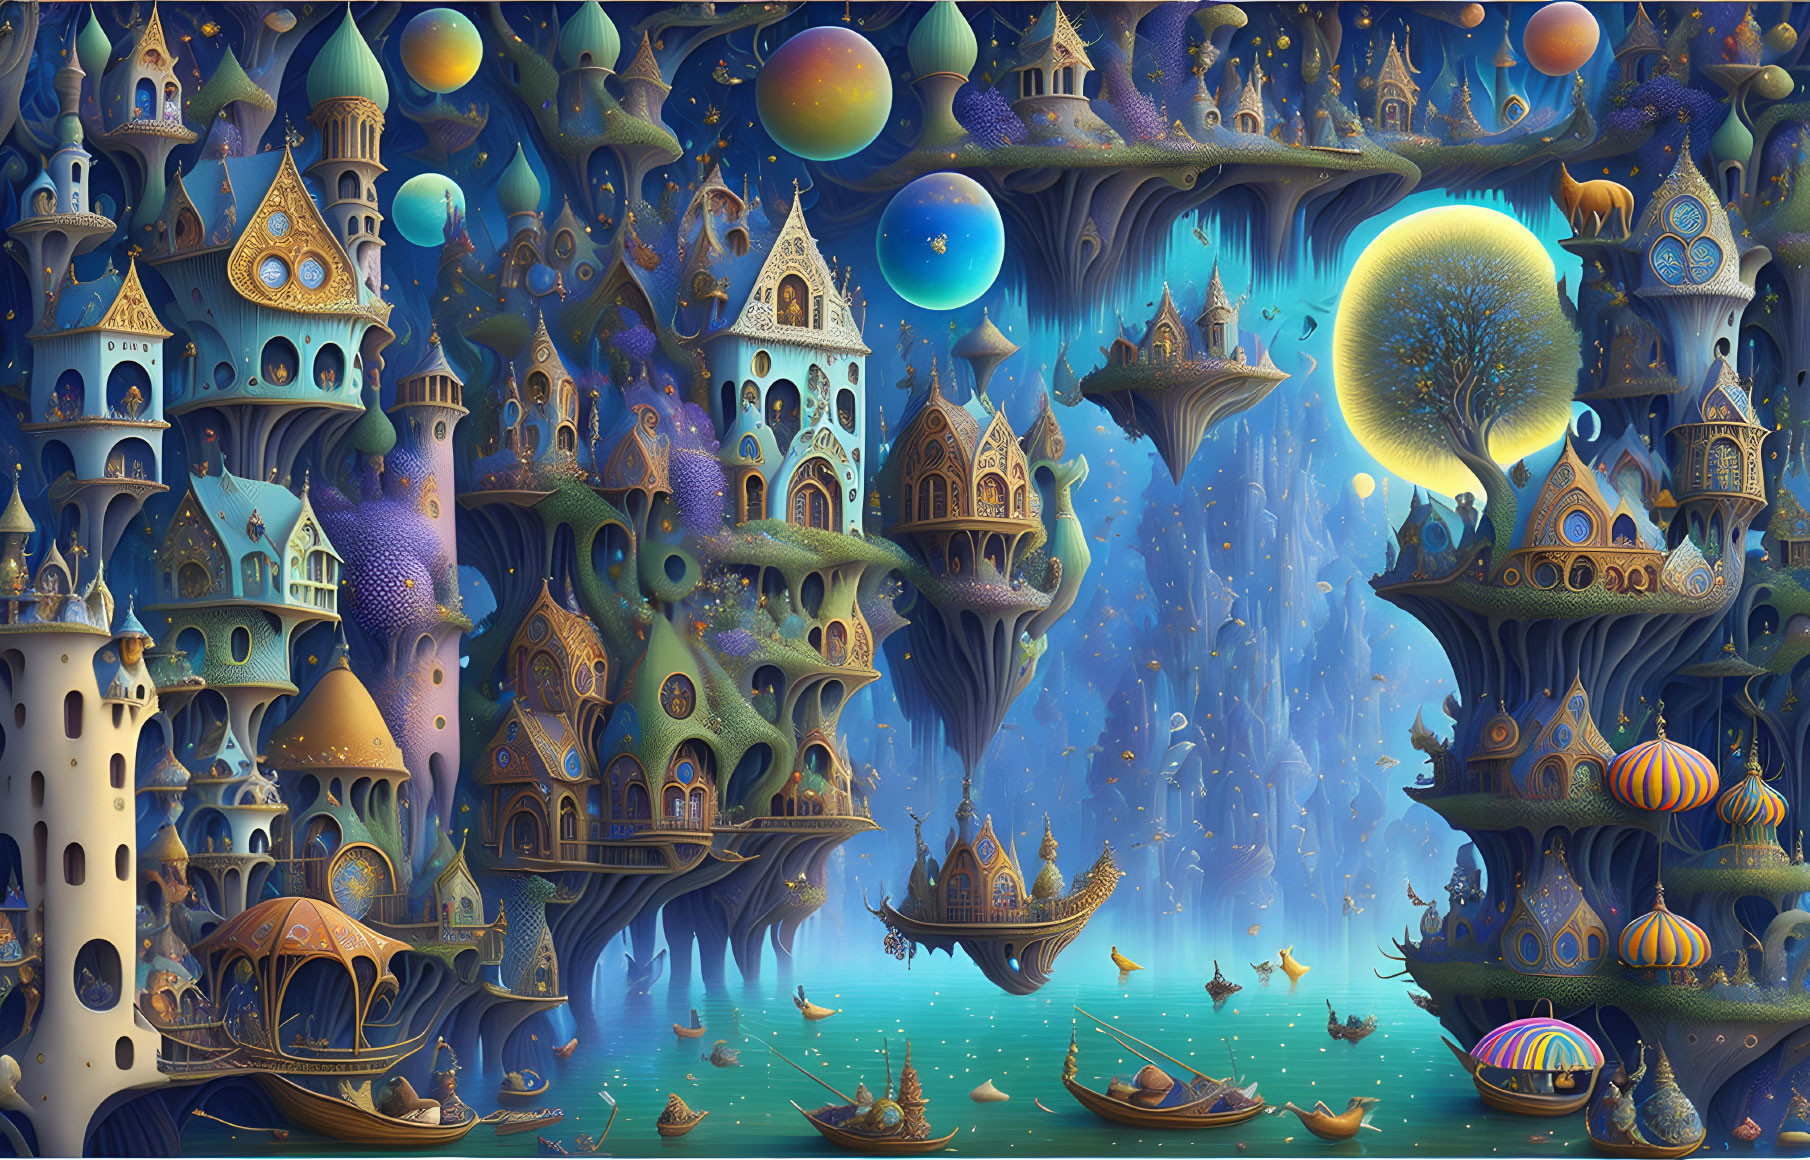 Fantasy landscape: Floating islands, whimsical towers, waterfalls, boats, and glowing orbs under